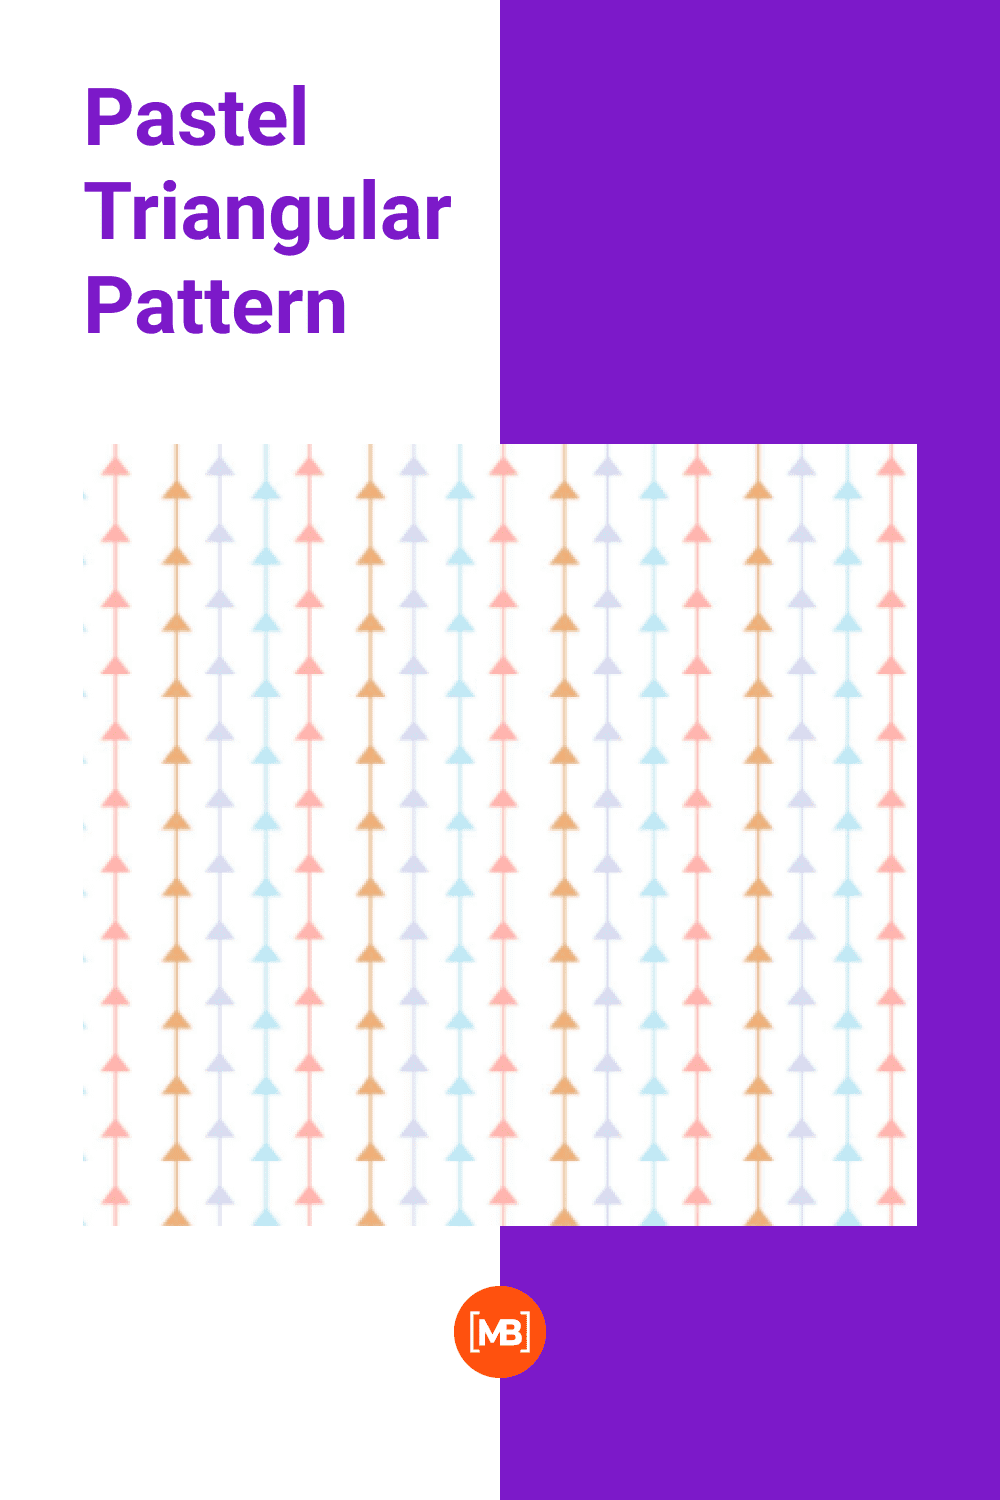 Triangular pattern in pastel colors.